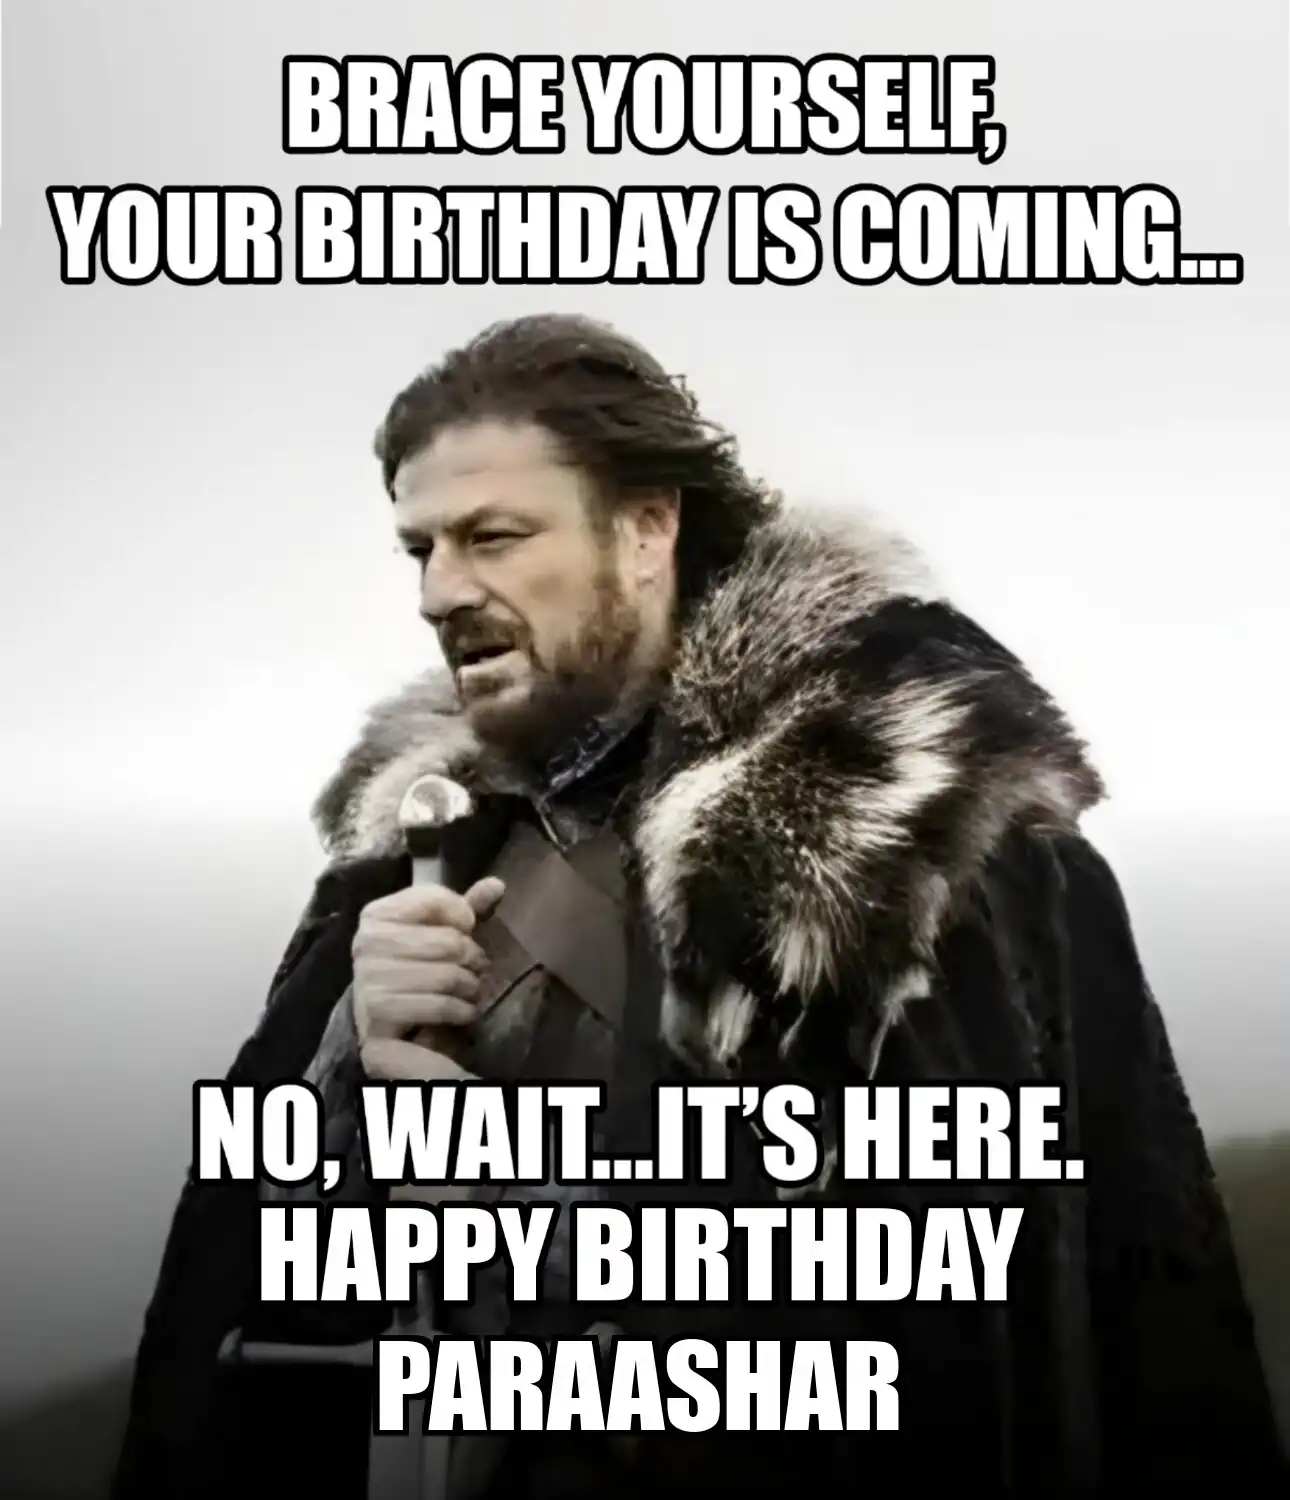 Happy Birthday Paraashar Brace Yourself Your Birthday Is Coming Meme